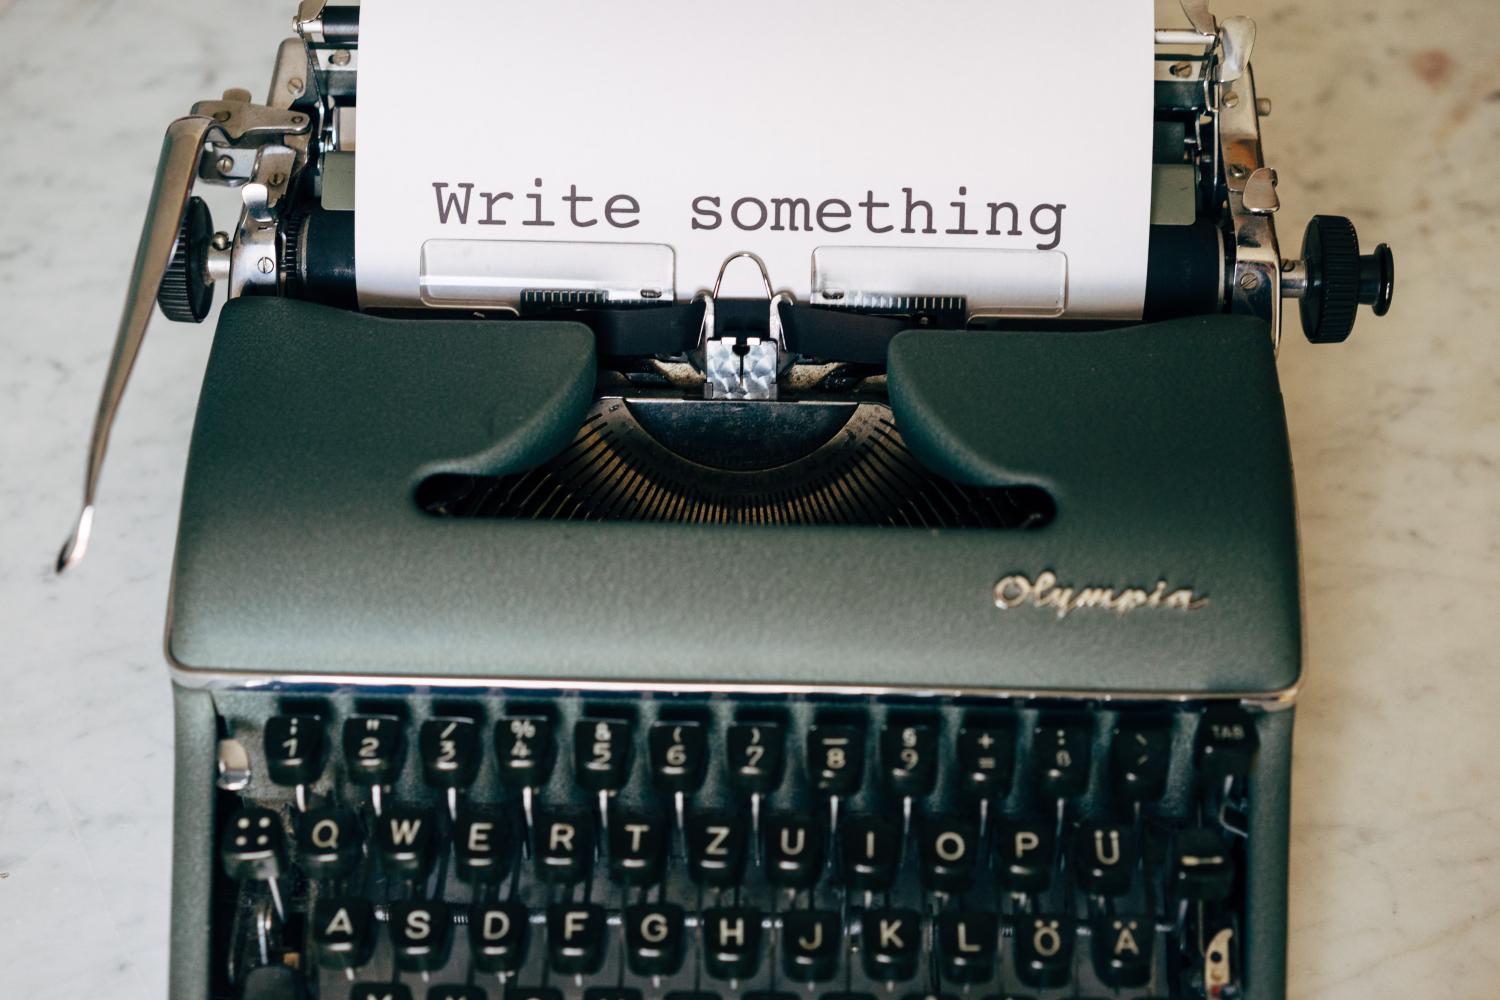 Typewriter with words "write something" typed on the paper